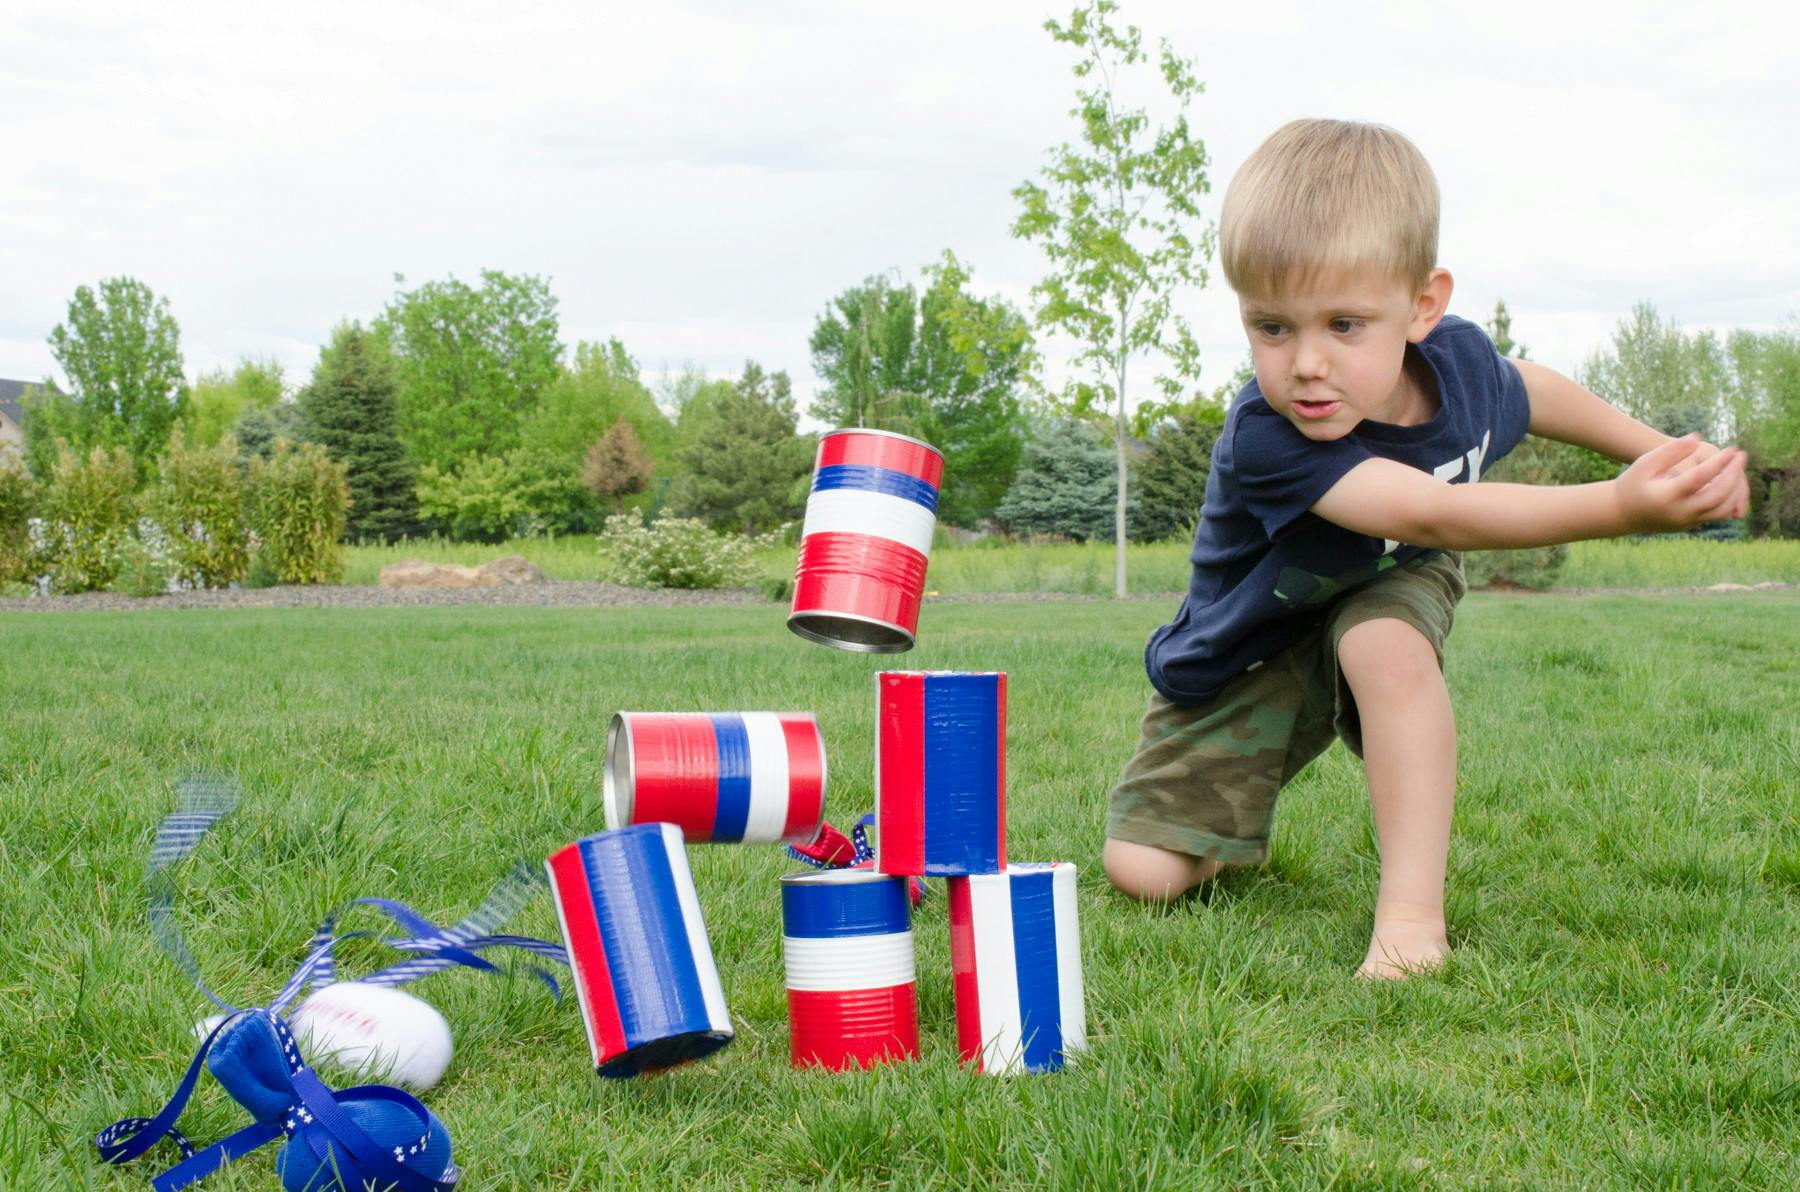 A boy throwing a bean bag at a stack of cans in a yard.